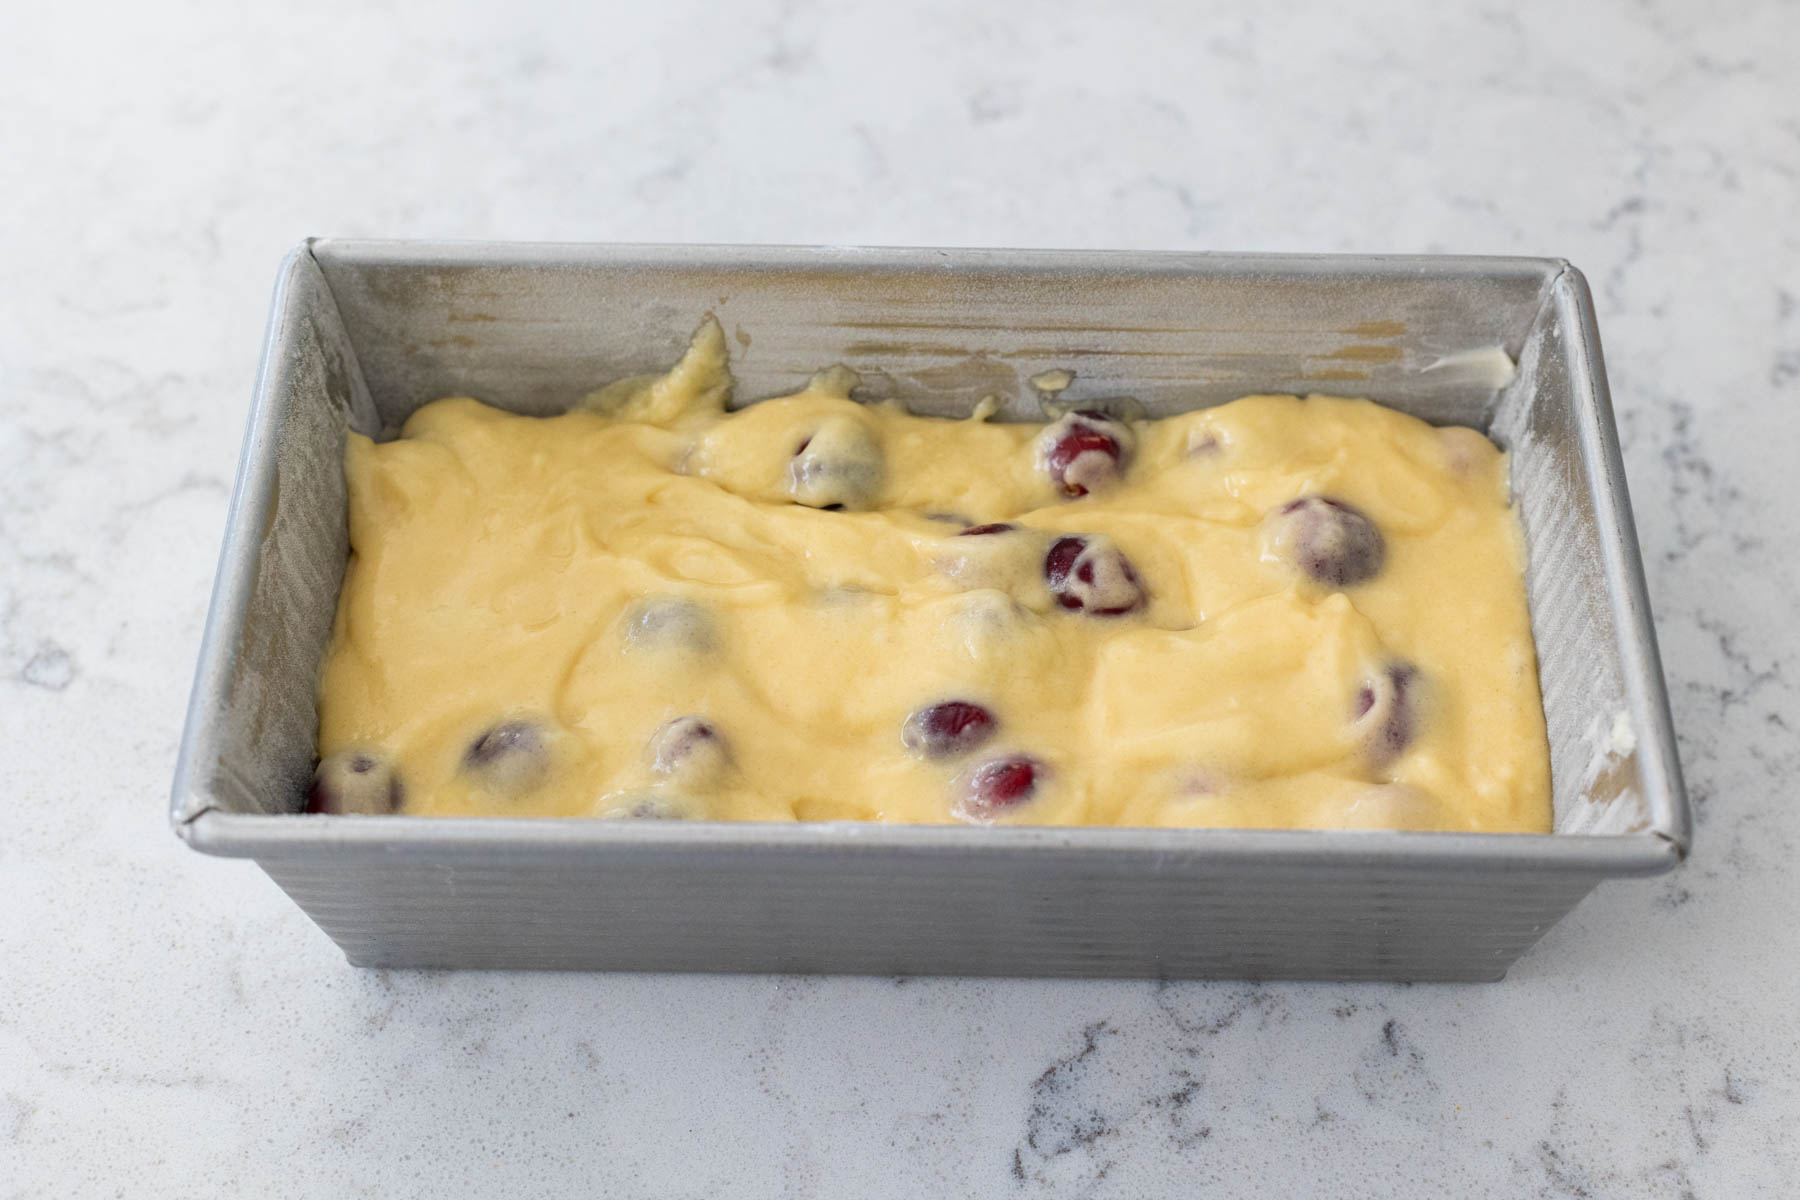 The cranberry bread batter has been leveled into a bread pan.